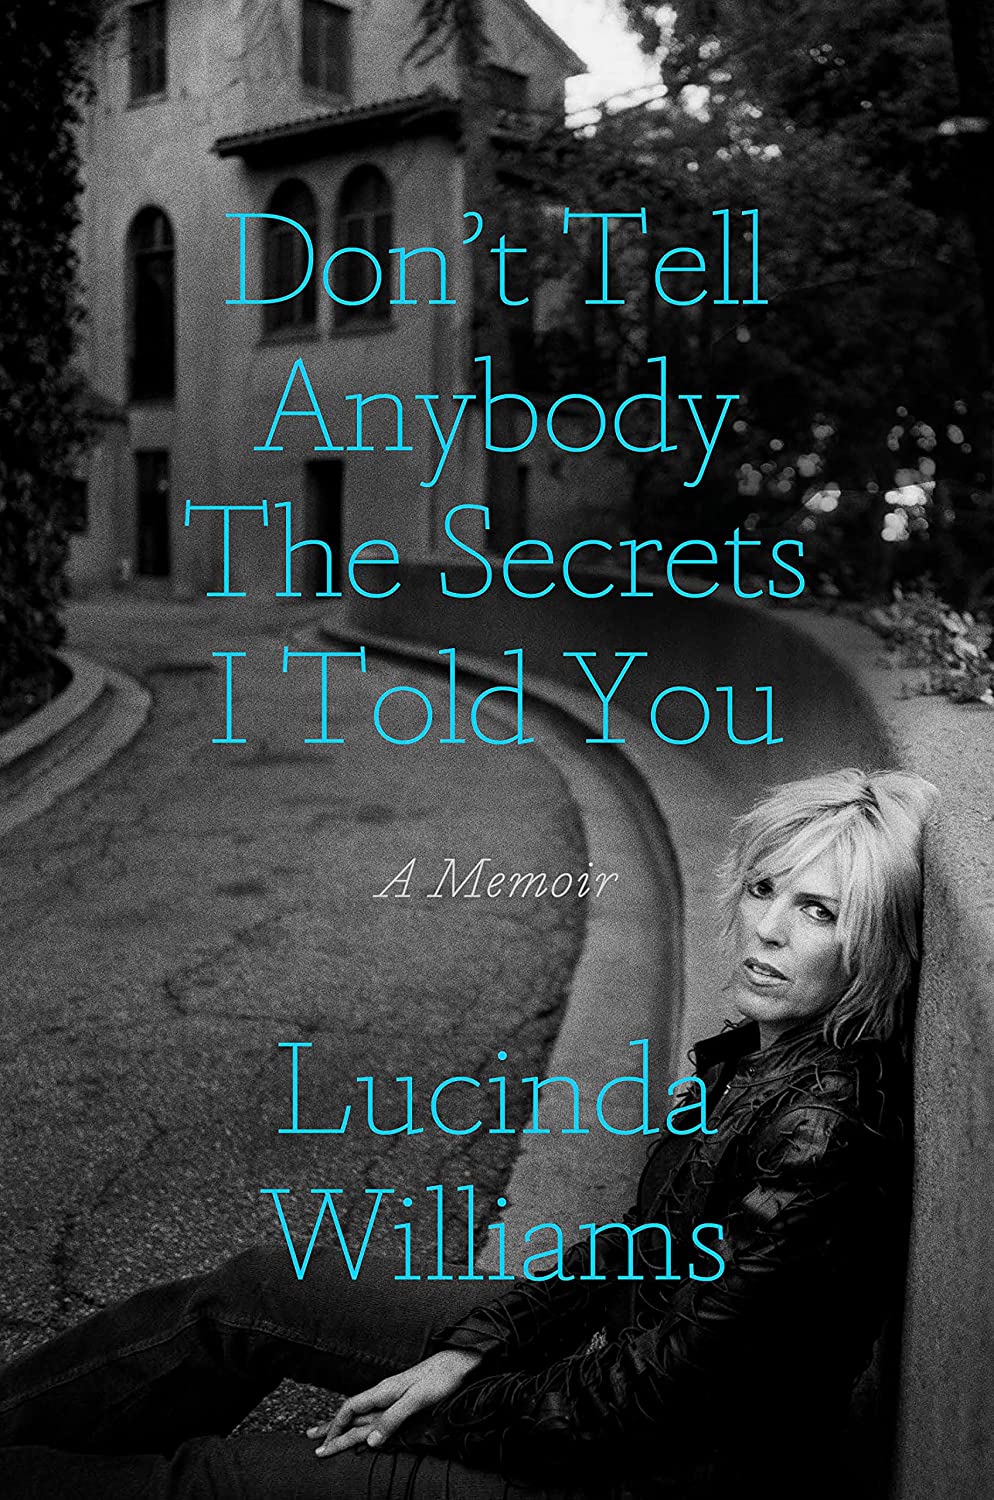 LUCINDA WILLIAMS - DON'T TELL ANYBODY THE SECRETS I TOLD YOU: A MEMOIR - HARDCOVER - BOOK